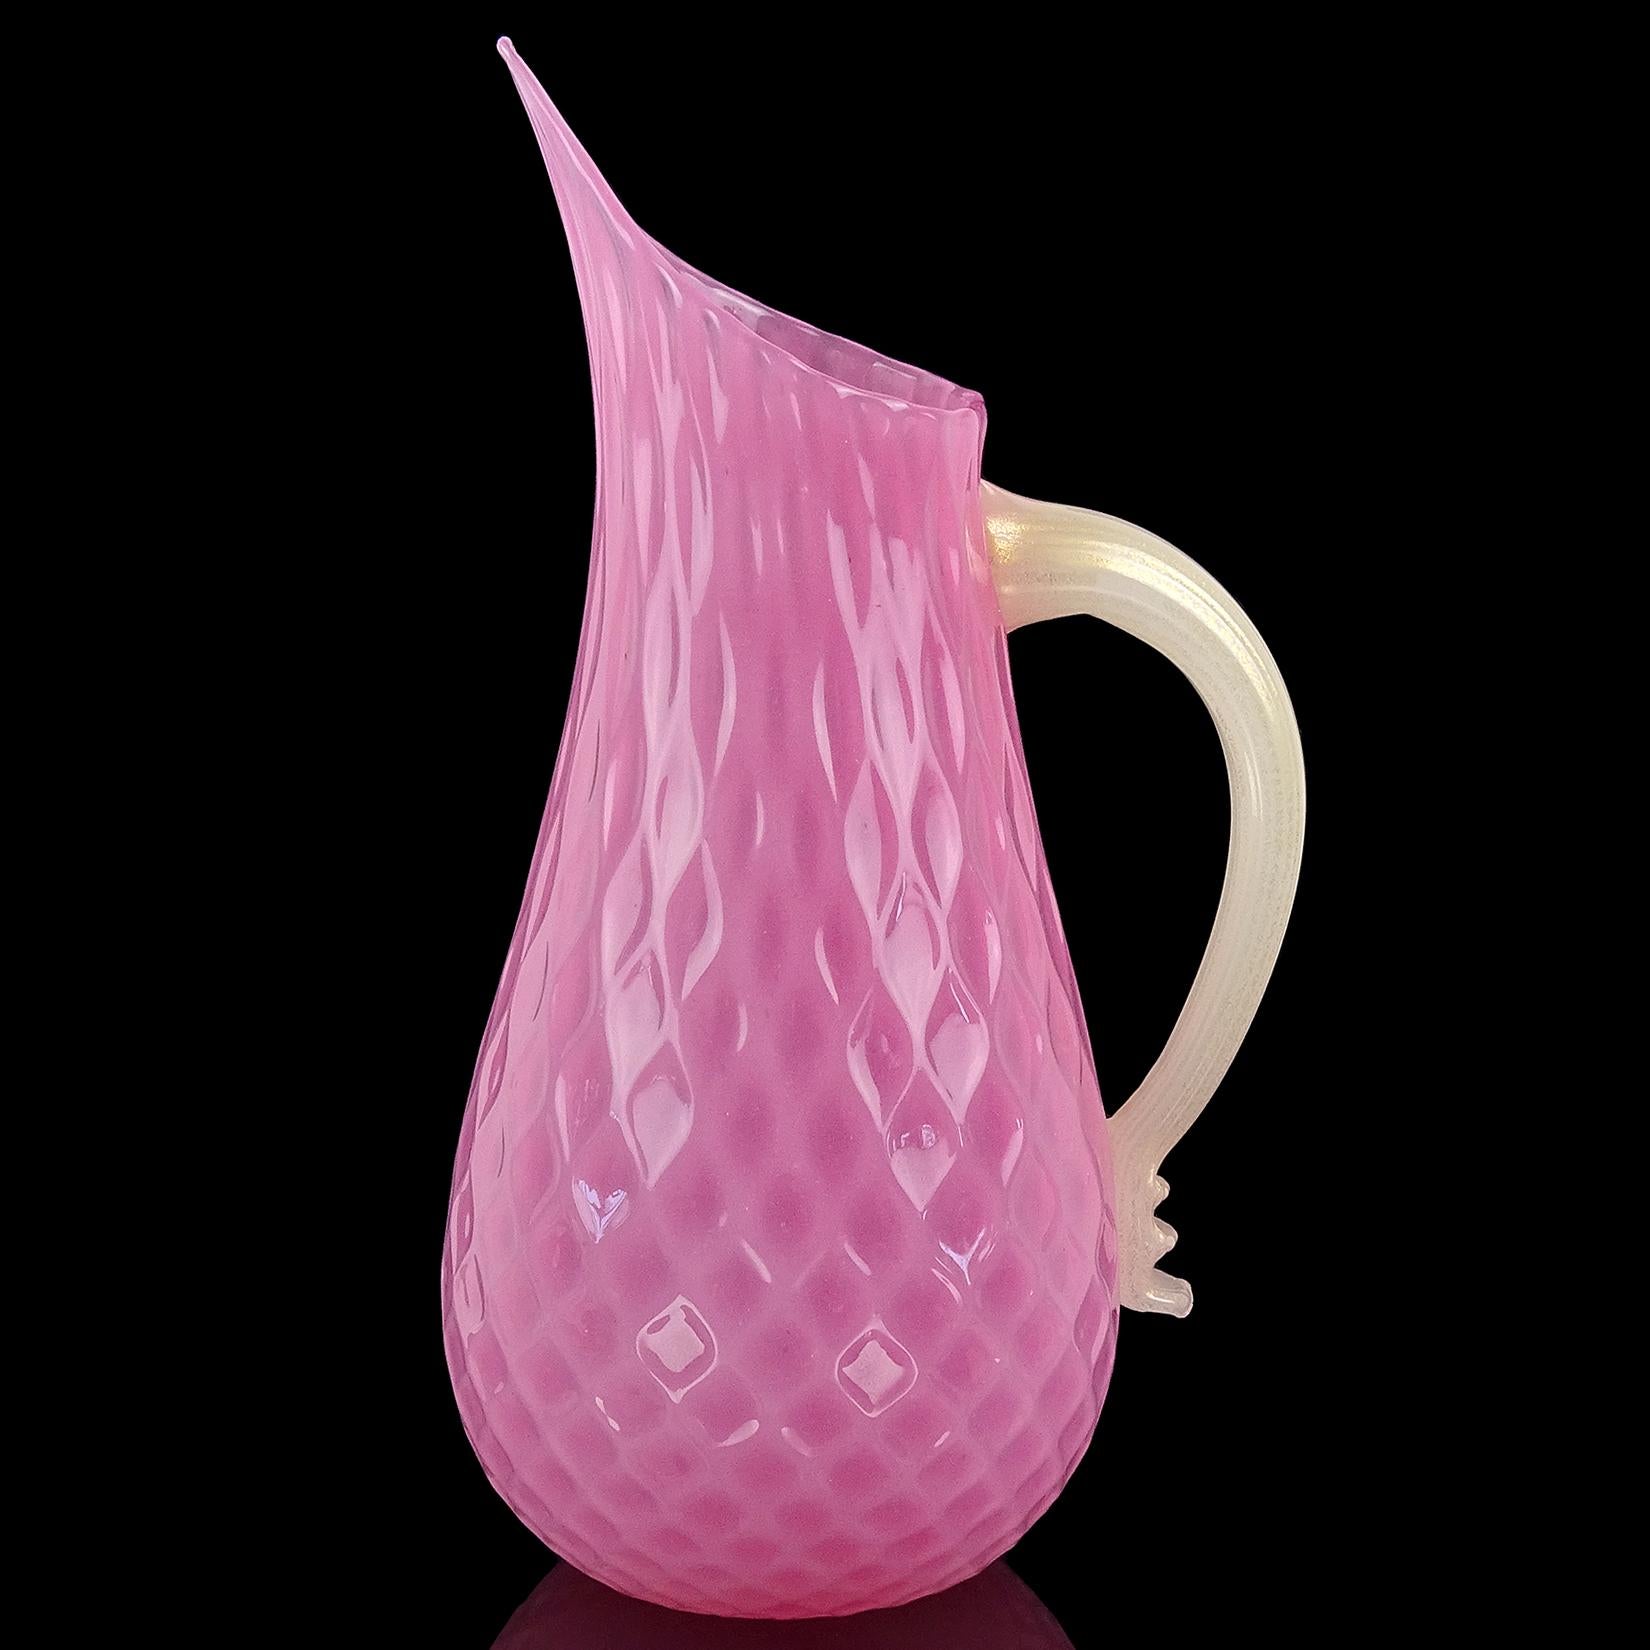 Beautiful and large, vintage Murano hand blown opalescent pink and gold flecks Italian art glass pitcher / flower vase. The piece has a diamond quilted design, creating a unique pattern throughout the body. it also has a large applied handle. The